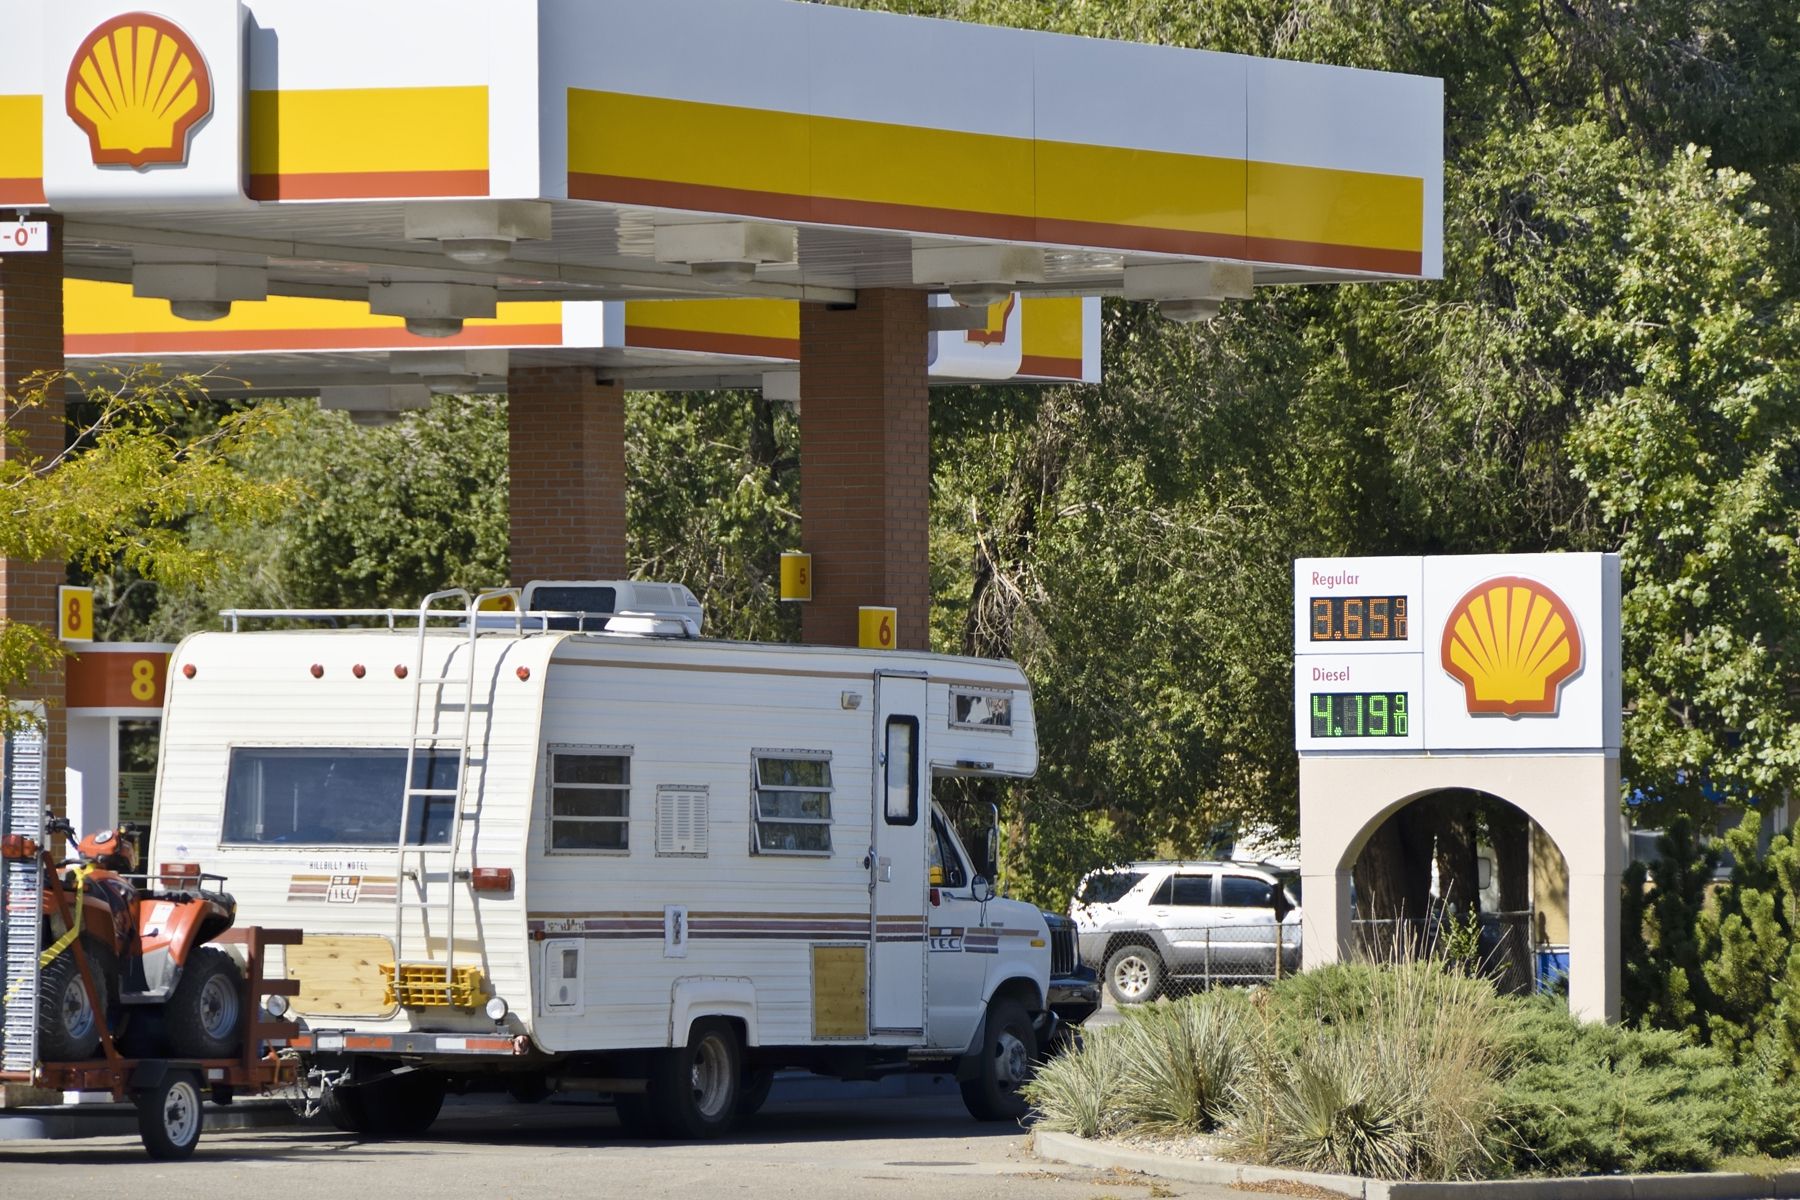 <p>Even with diesel (which most larger RVs run on) currently hovering around $4 a gallon, fuel costs can add up quickly. "The RV lifestyle can also negatively impact the environment, which is something we struggle with frequently," said millennial blogger <a href="https://theroadslowlytraveled.com/">Nathan Hengst</a>. He and his wife, Ashley, were living in Newark, Delaware, when they decided to quit the rat race and hit the road in 2017. His advice? Limit your mileage and <a href="https://blog.cheapism.com/rv-for-sale/">choose your RV wisely</a>. "Seriously ask yourself why you're considering full-time RV life, and then after you feel confident in your answer, choose the smallest-wheeled home you think you can tolerate."  </p>